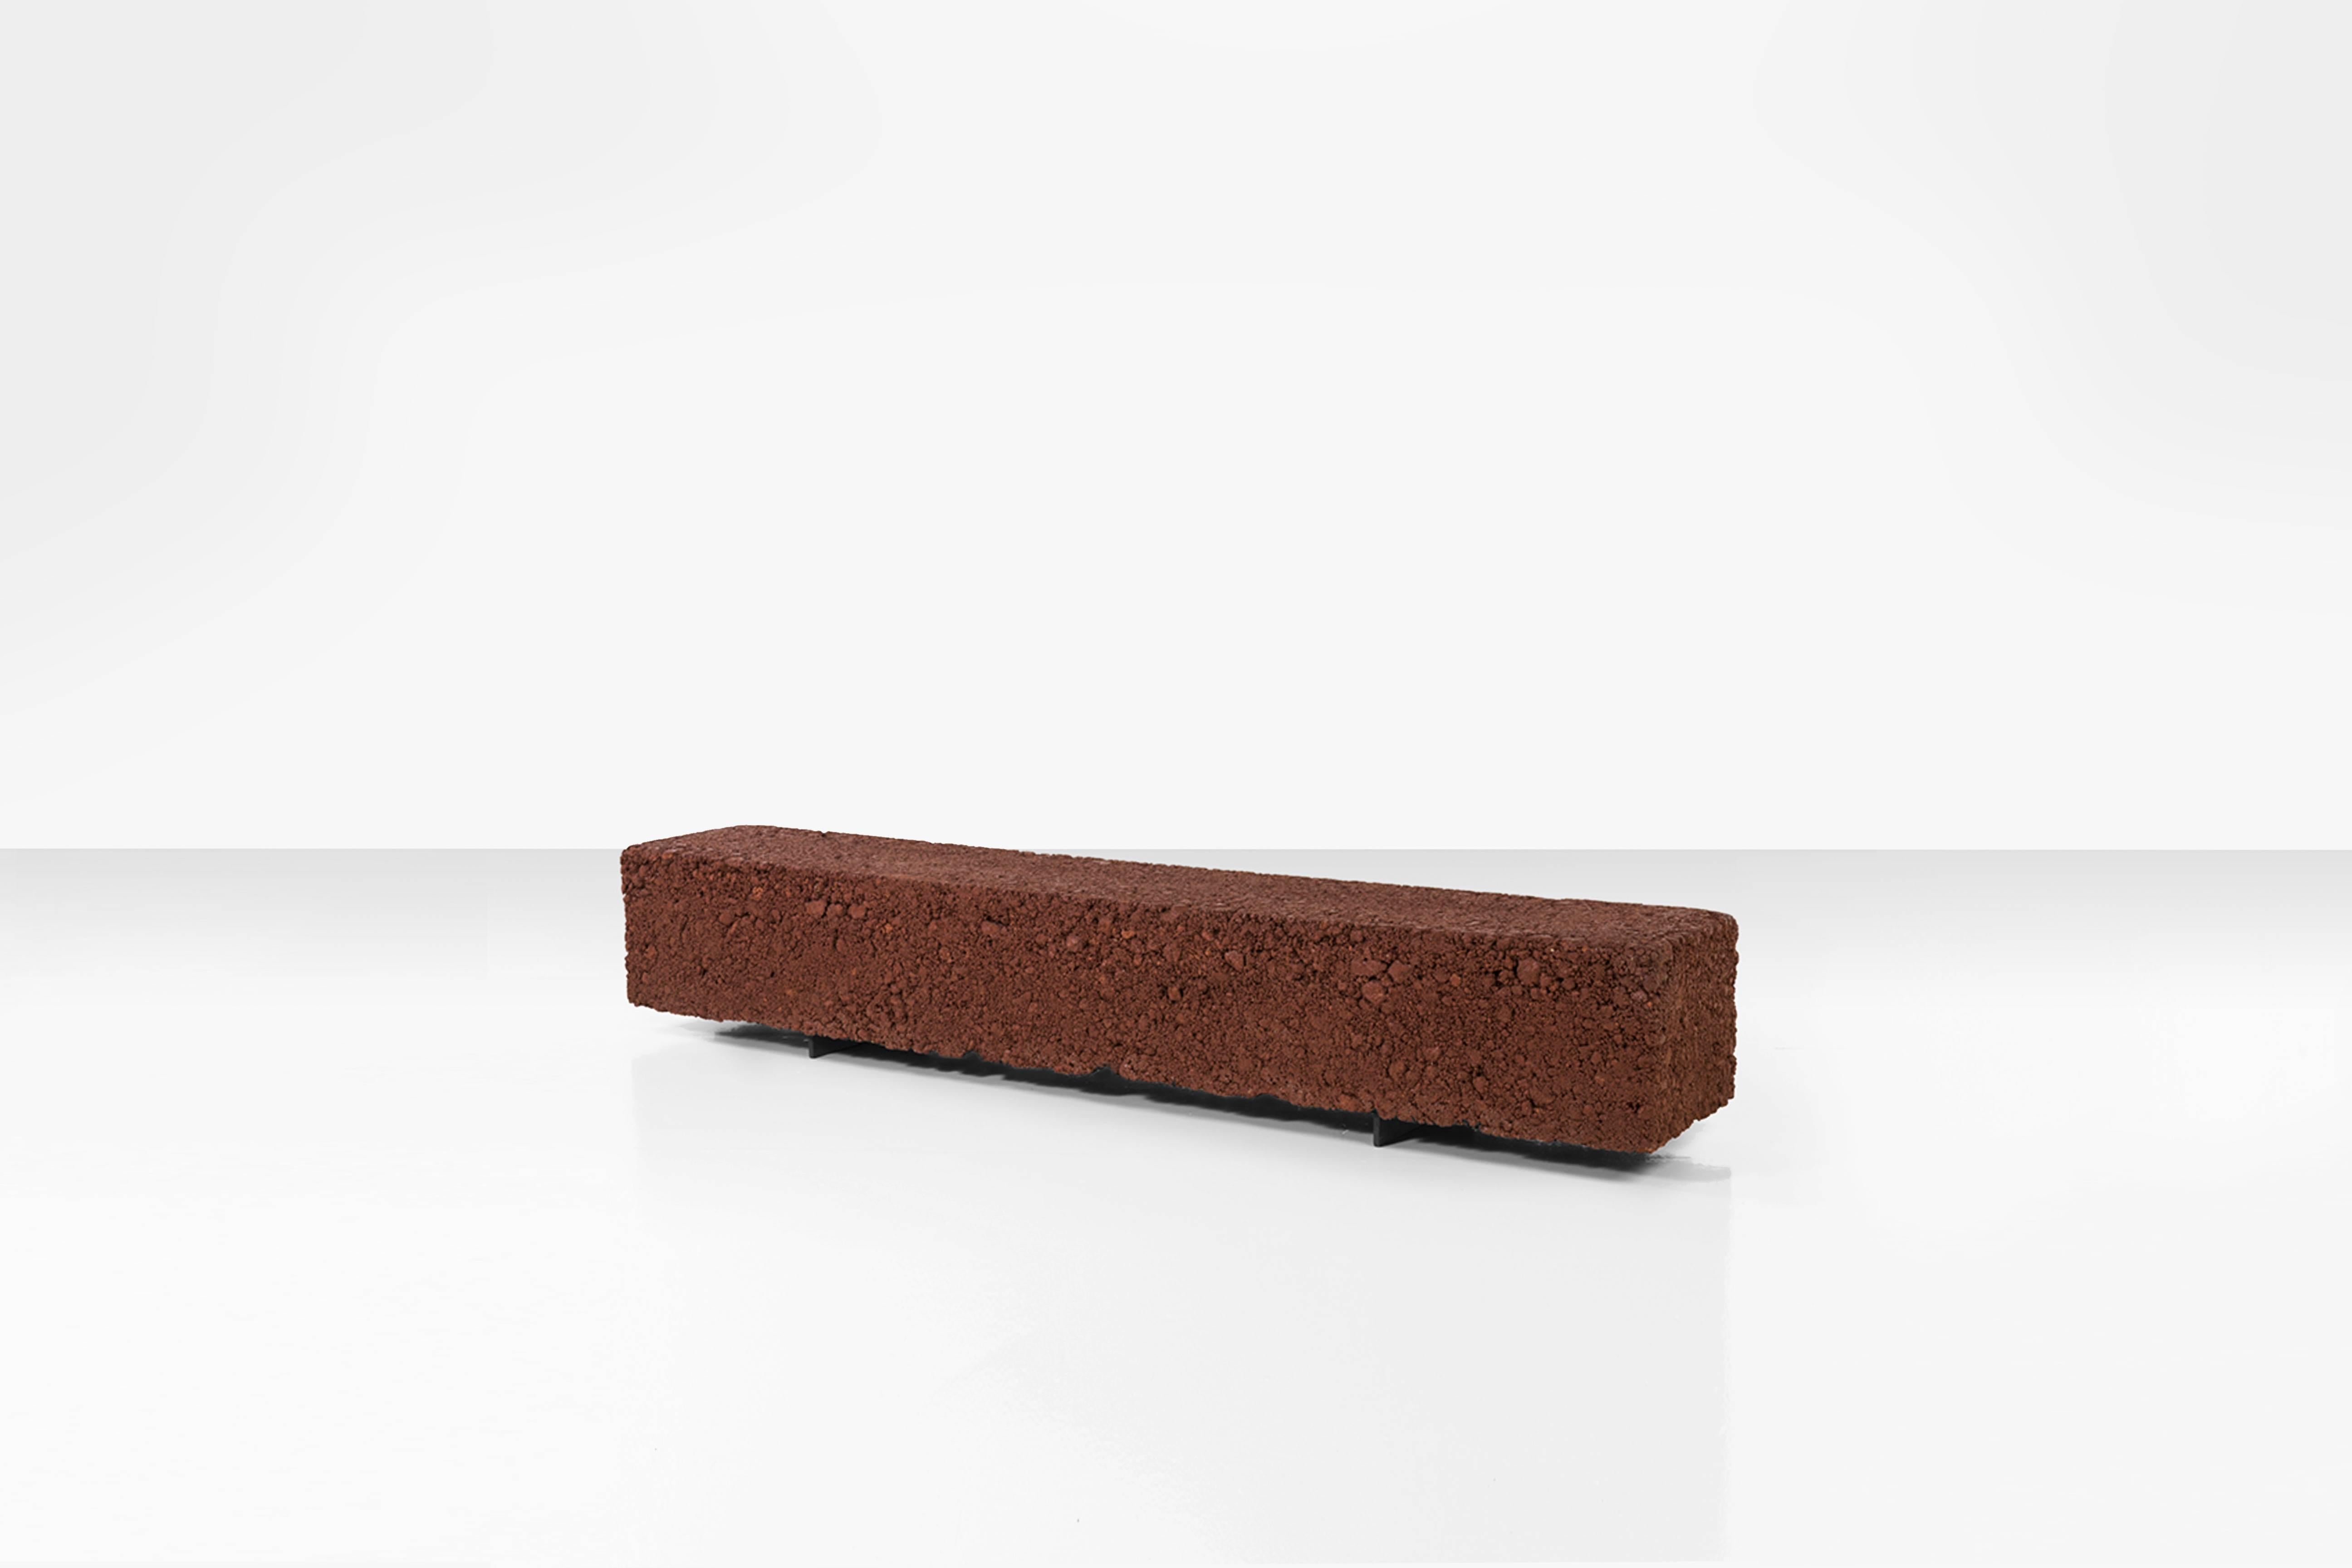 Organic looking cuboid shaped bench, designed by artist, designer Domingos Tótora. Made of recycled and painted cardboard, it rests on two simple iron supports, giving it a clean but natural character.

About the artist:
Domingos Tótora (born and